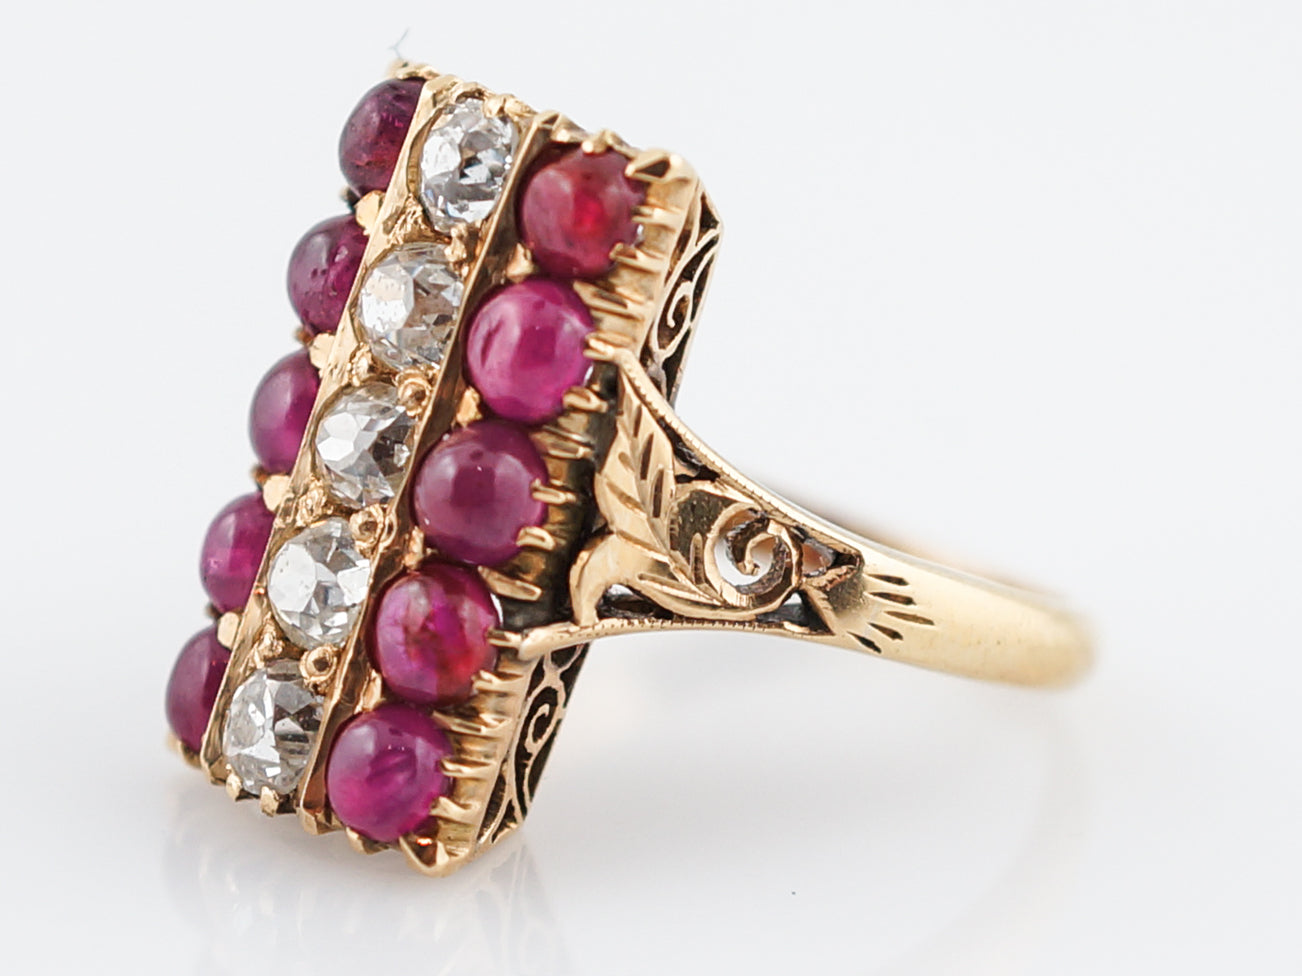 Vintage Cocktail Ring Retro 1.03 Old European Cut Diamond & Cabochon Cut Ruby in 18k Yellow Gold